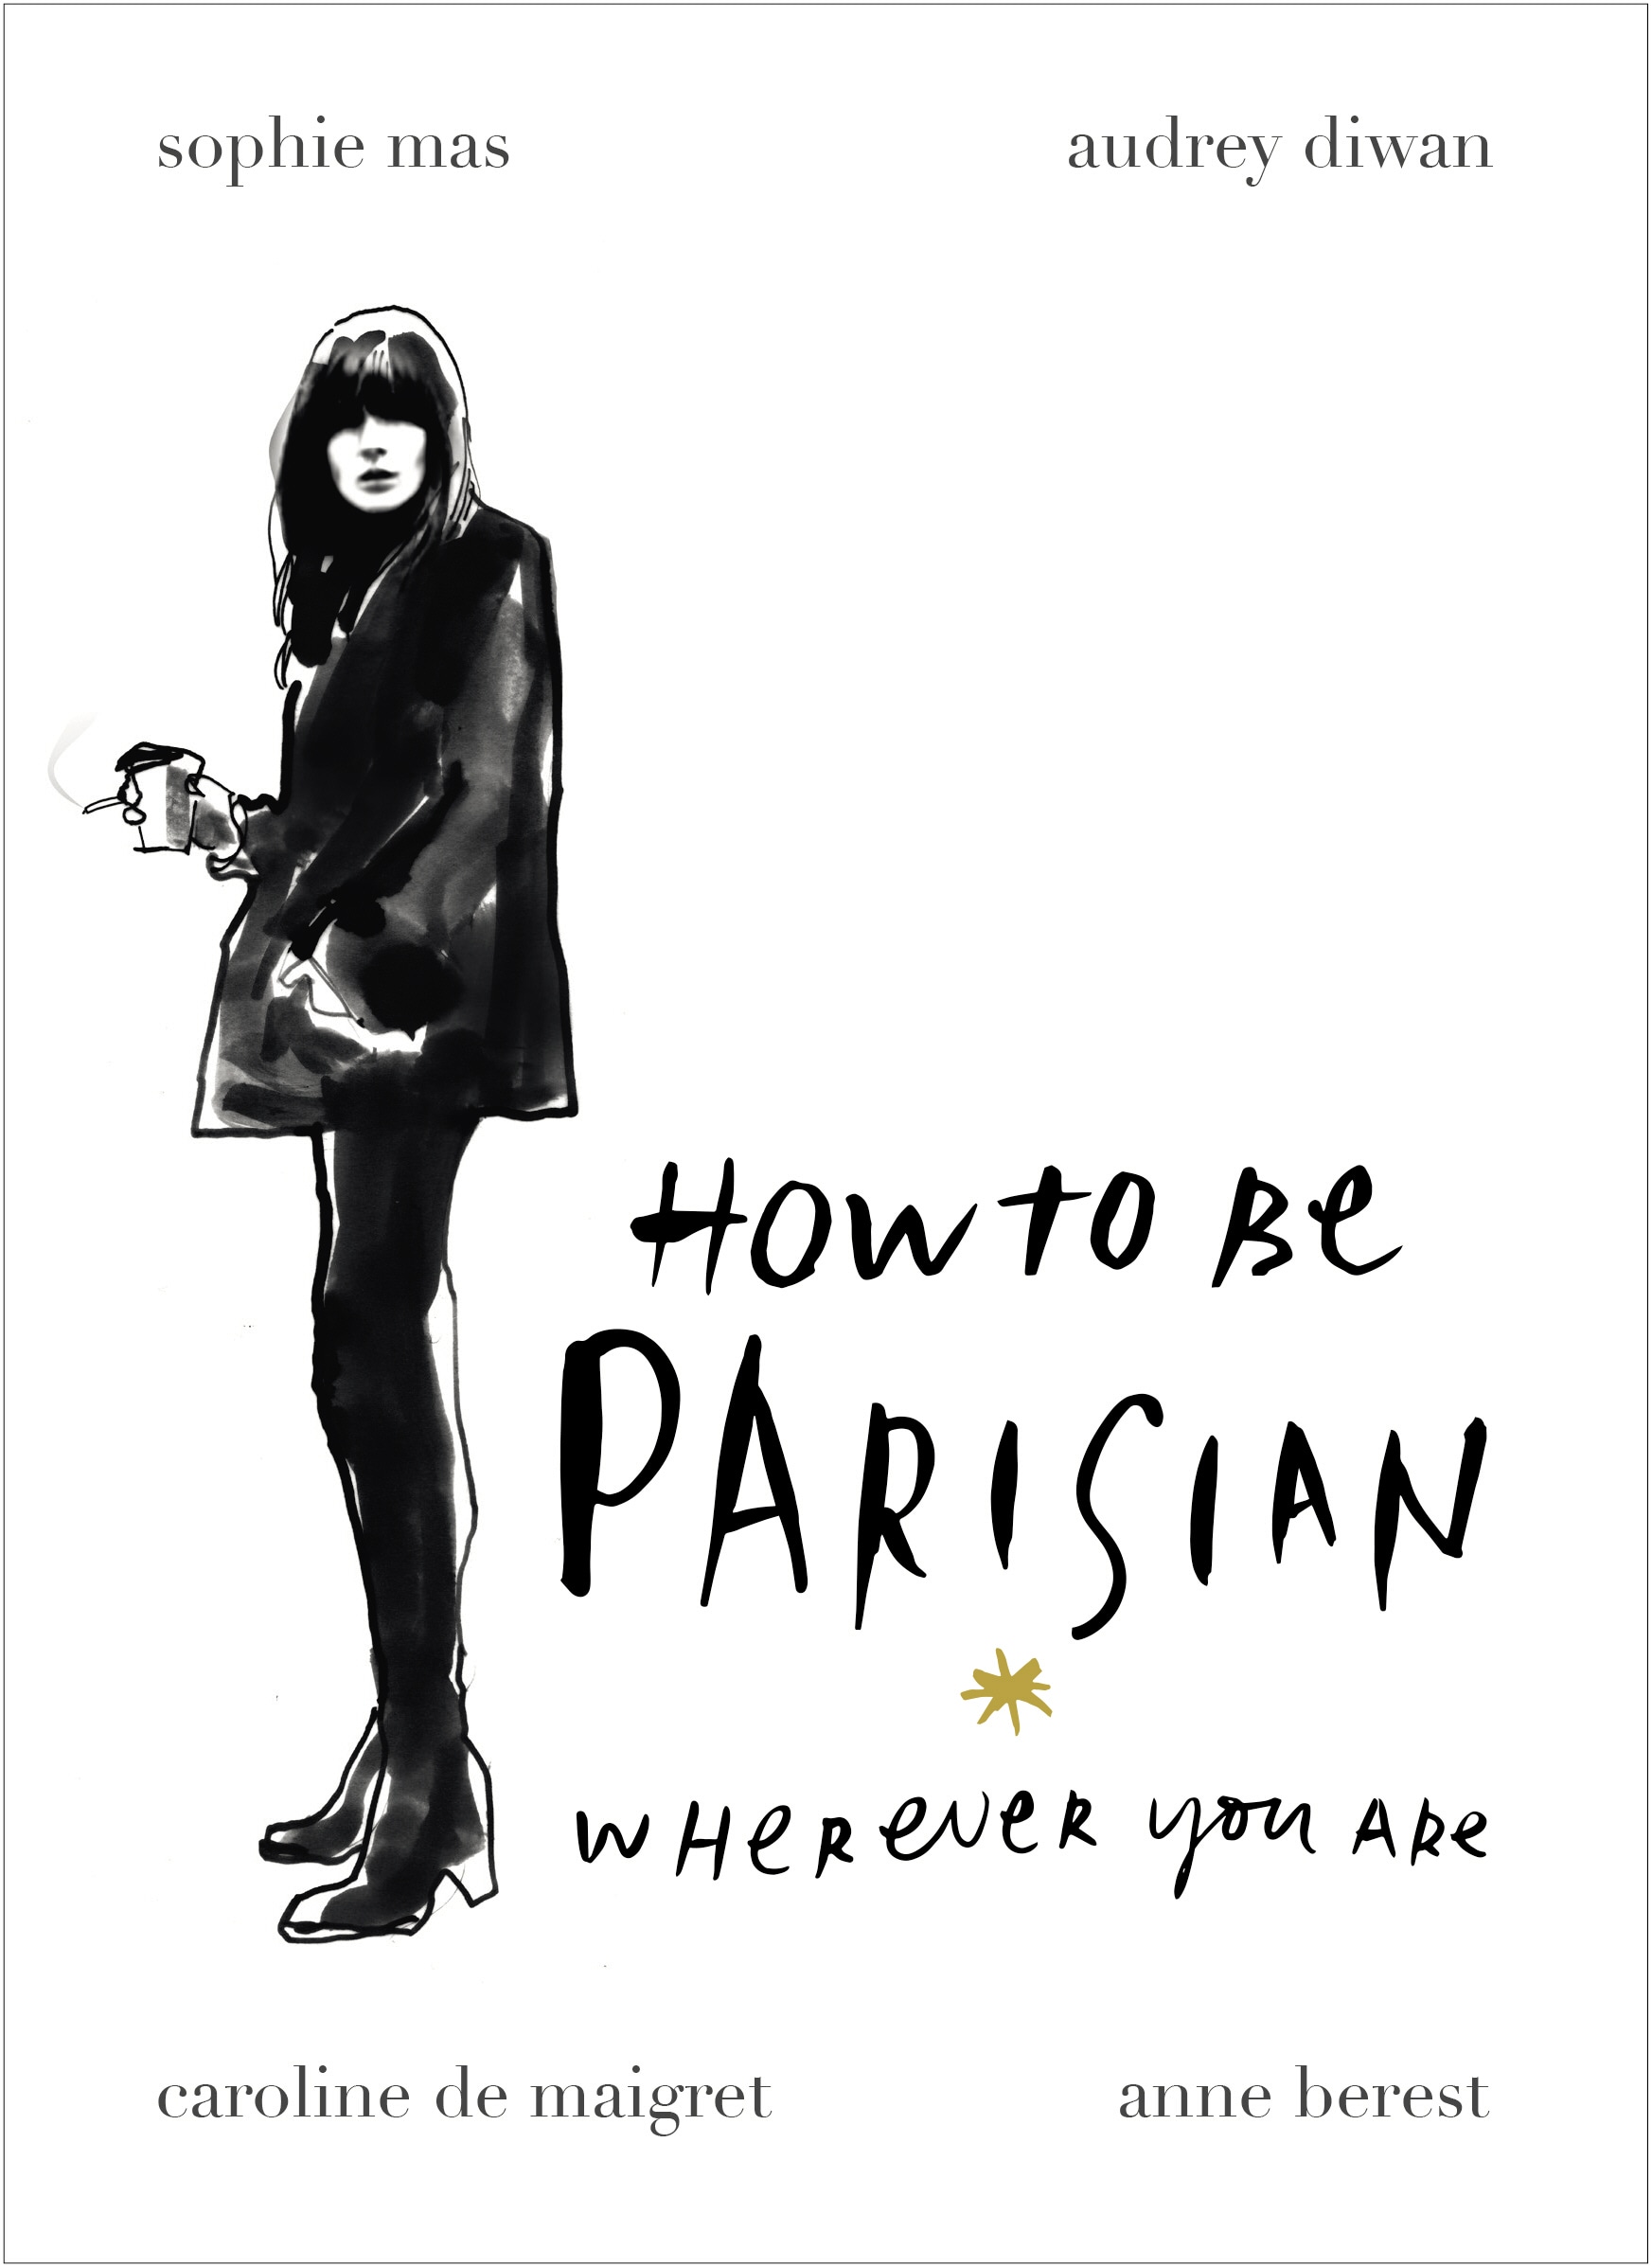 Book “How To Be Parisian” by Anne Berest — September 4, 2014